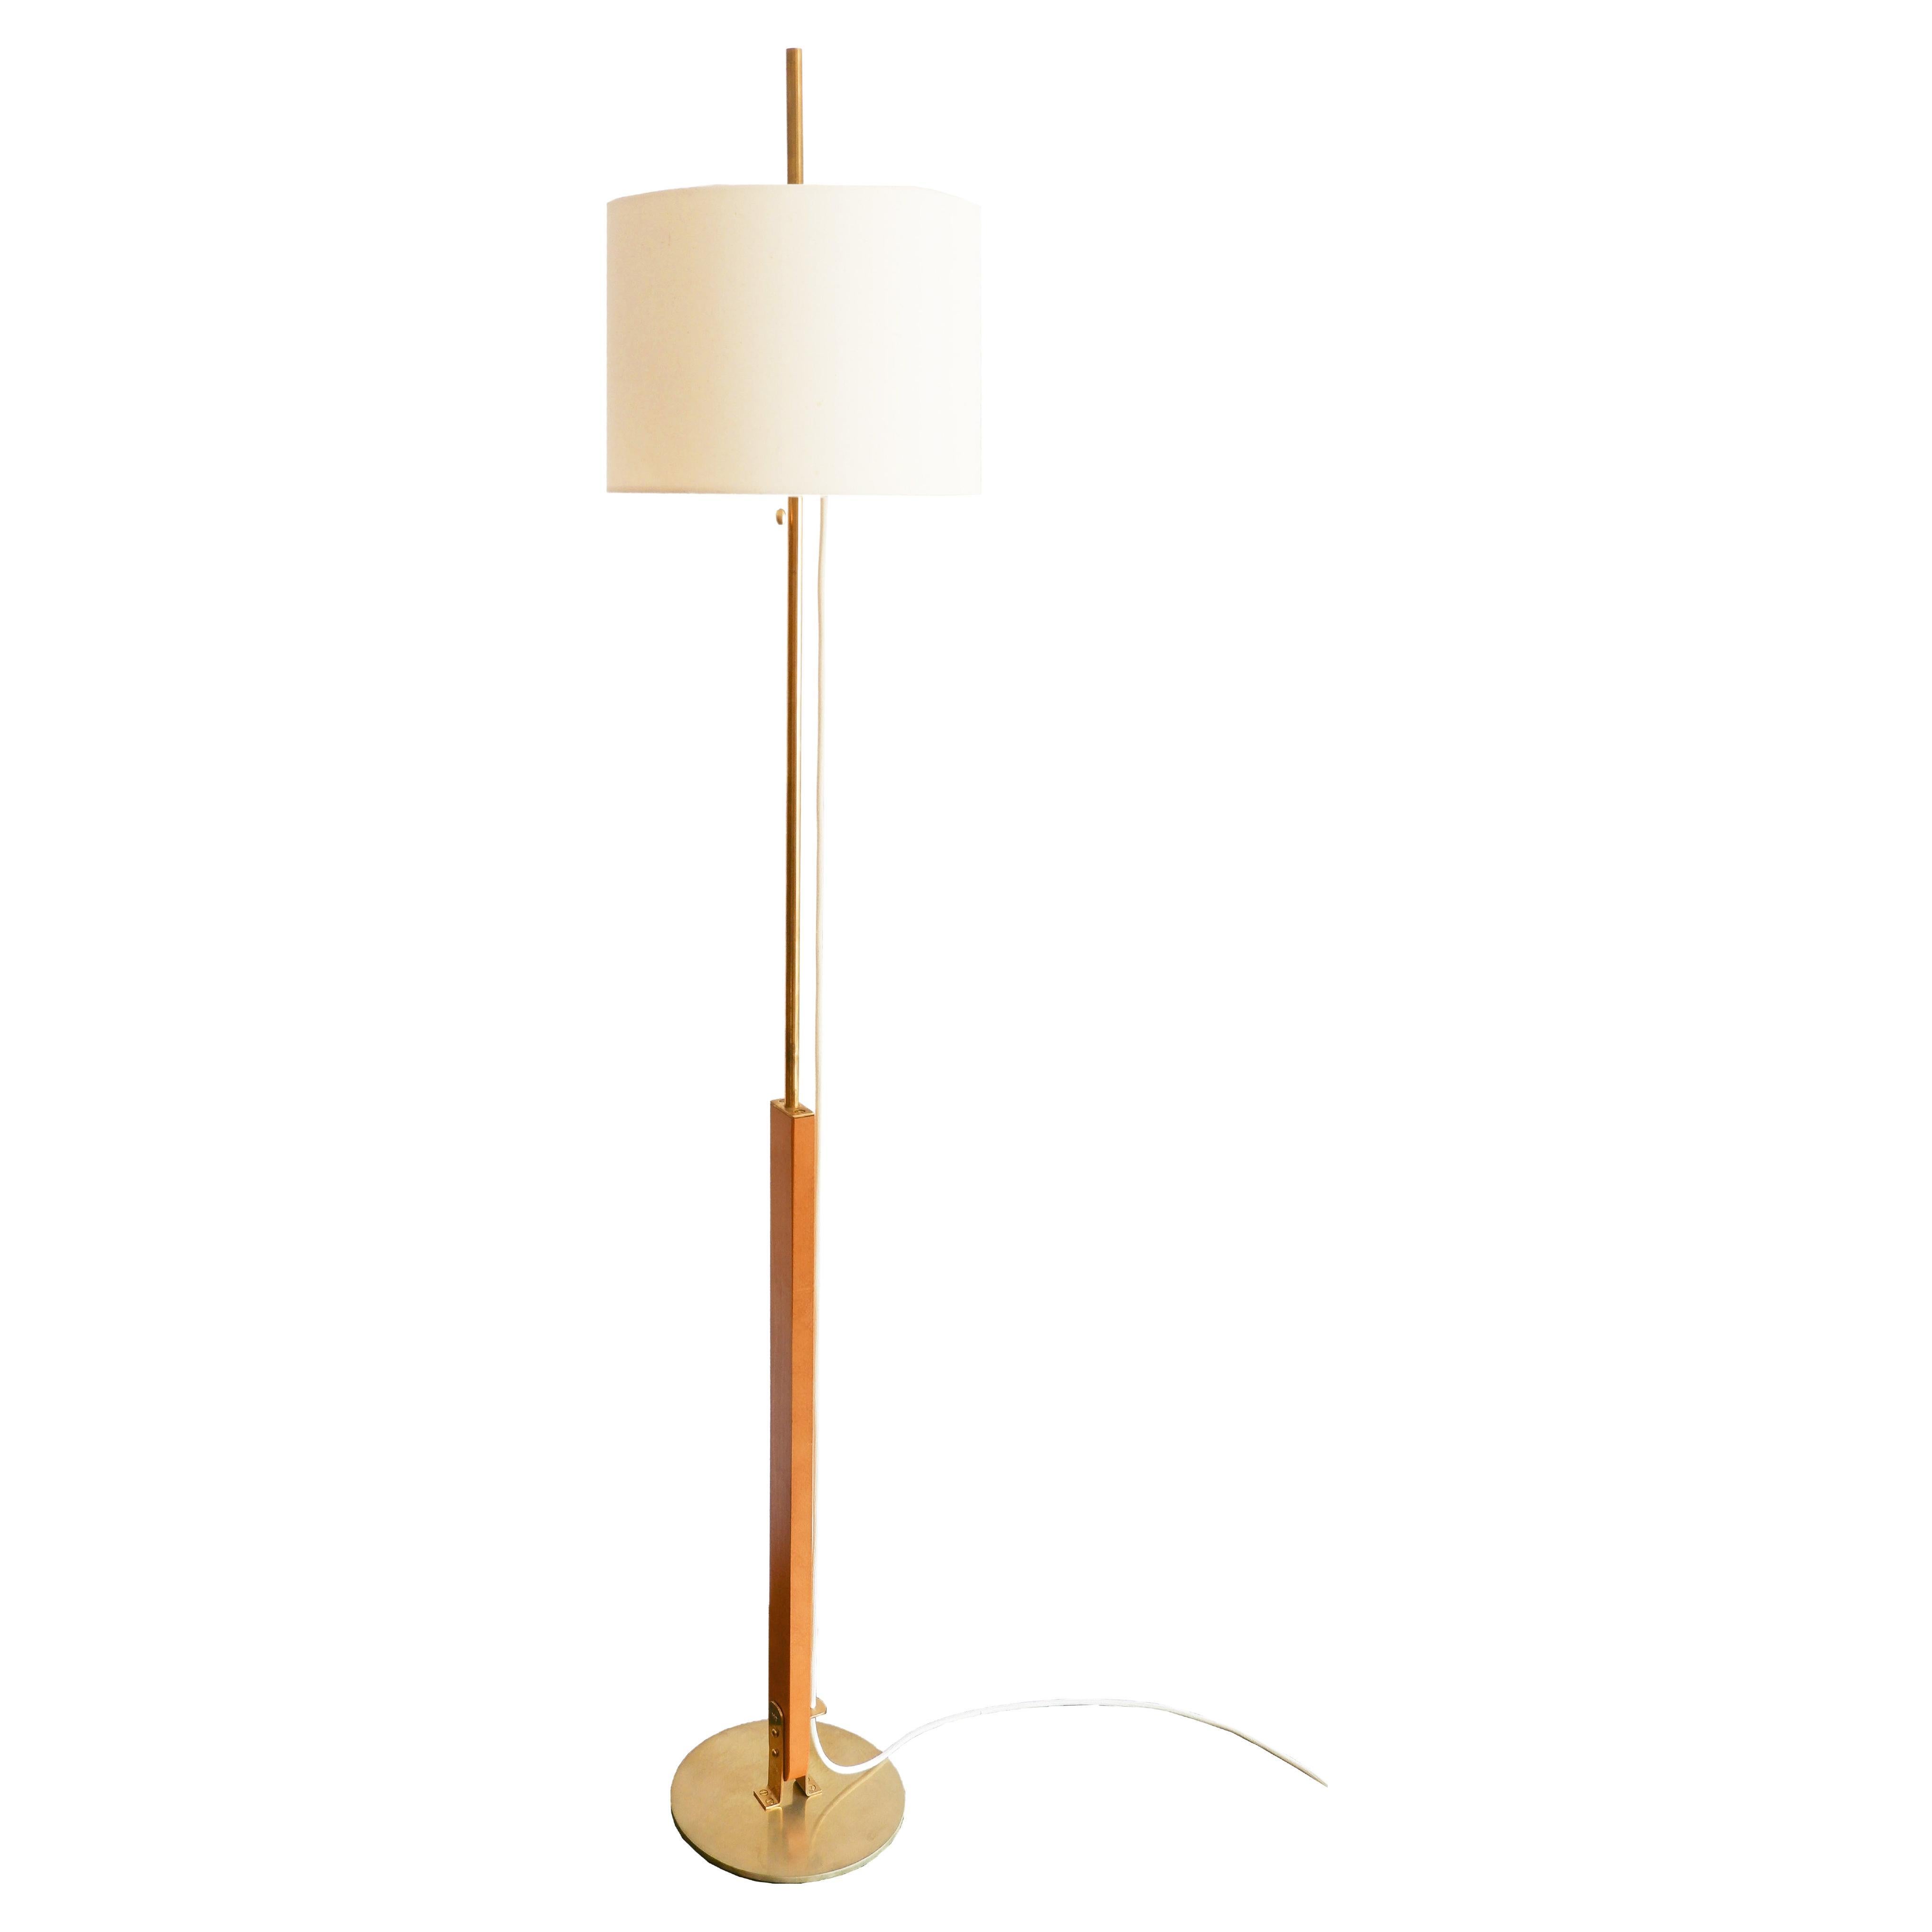 Contemporary, Handmade Floor Lamp, Wood, Brass, Fabric, Mediterranean Objects For Sale